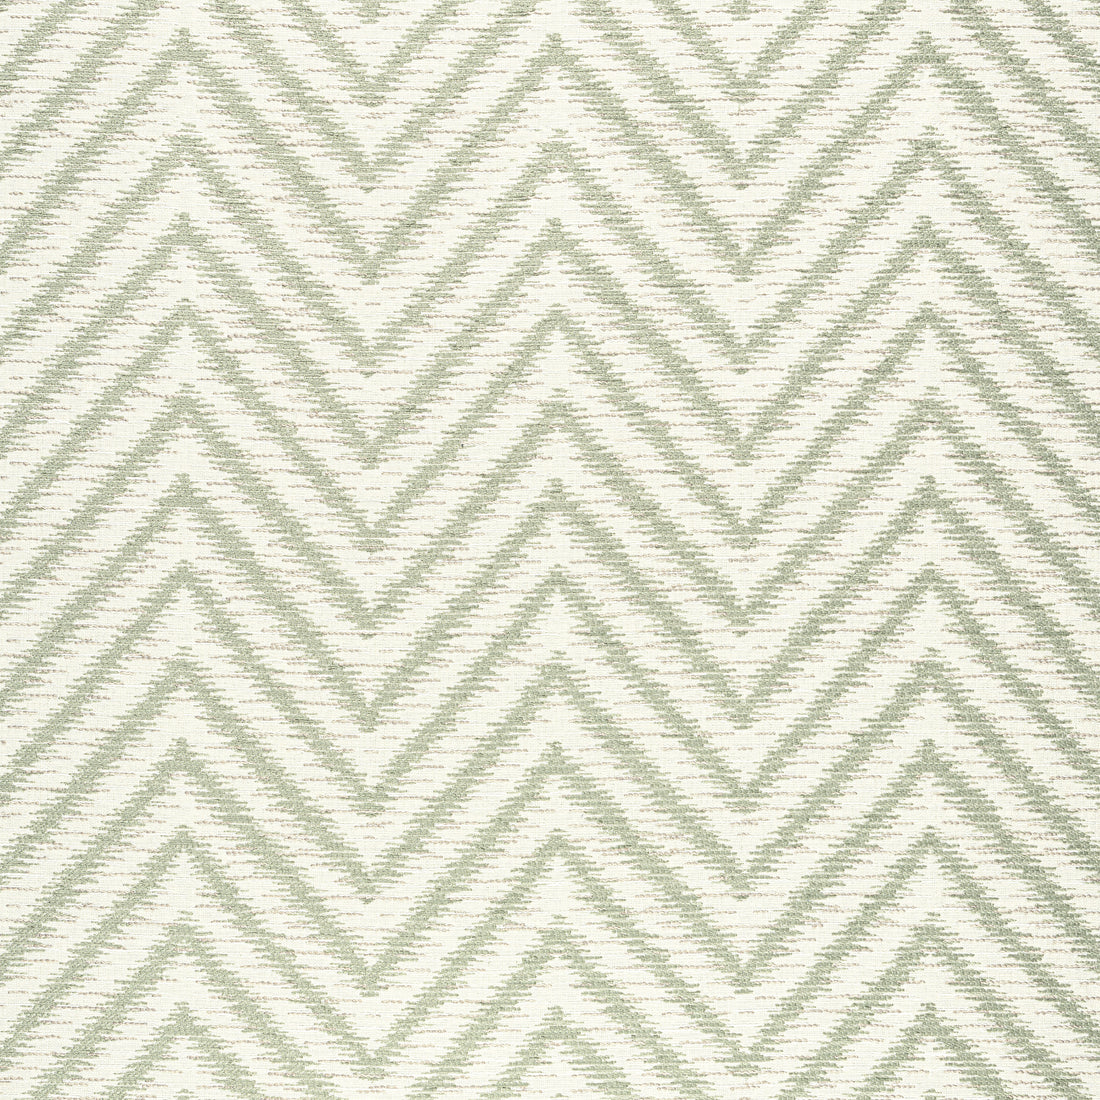 Aliso fabric in aloe color - pattern number W8817 - by Thibaut in the Haven collection